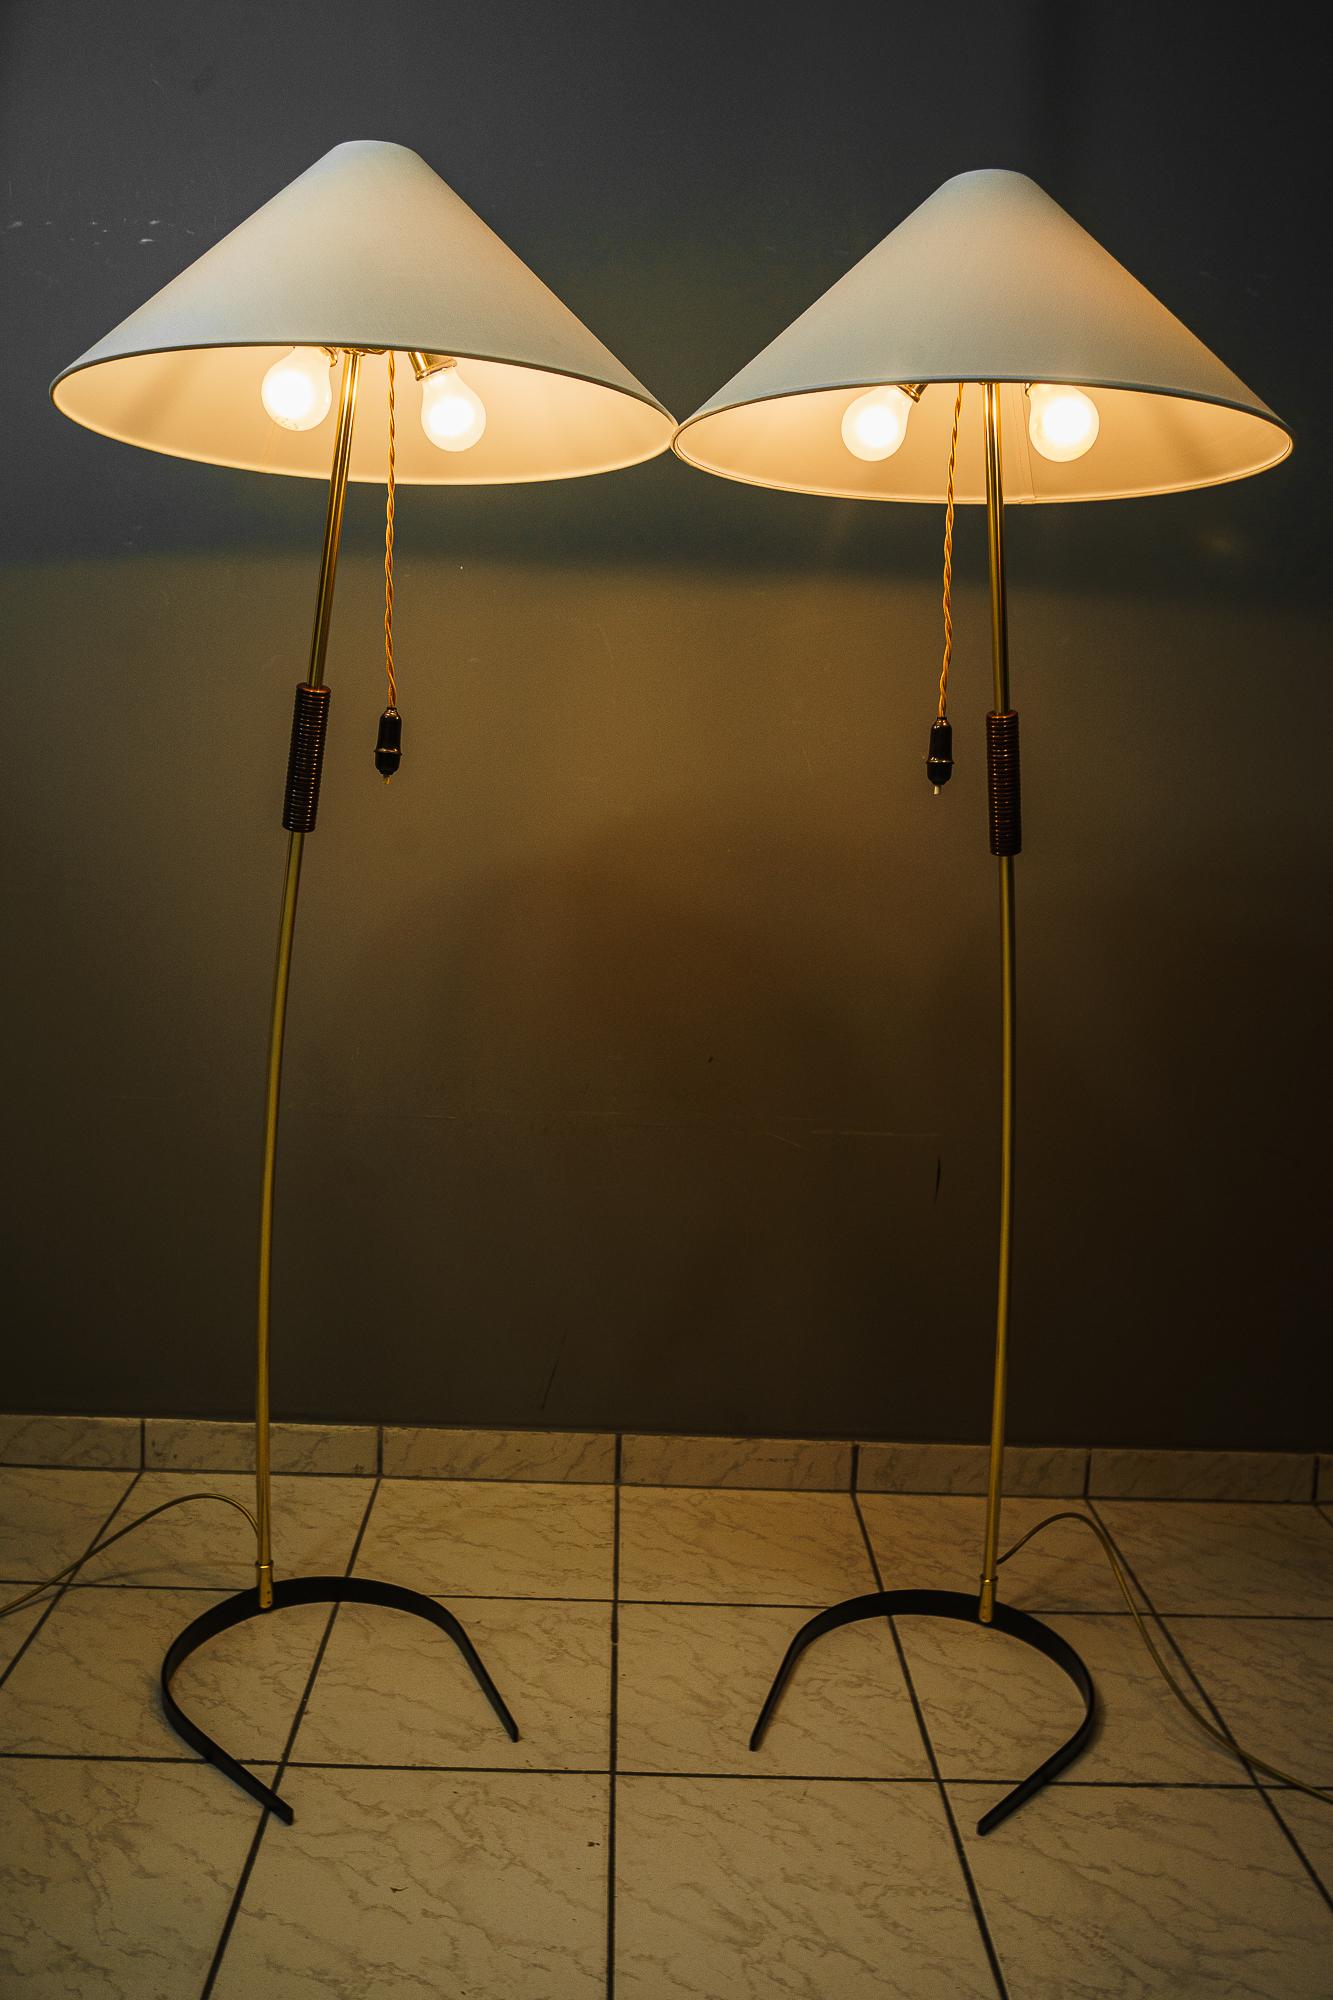 2x Rupert Nikoll Floor Lamps with Wood Handle, circa 1950s For Sale 8